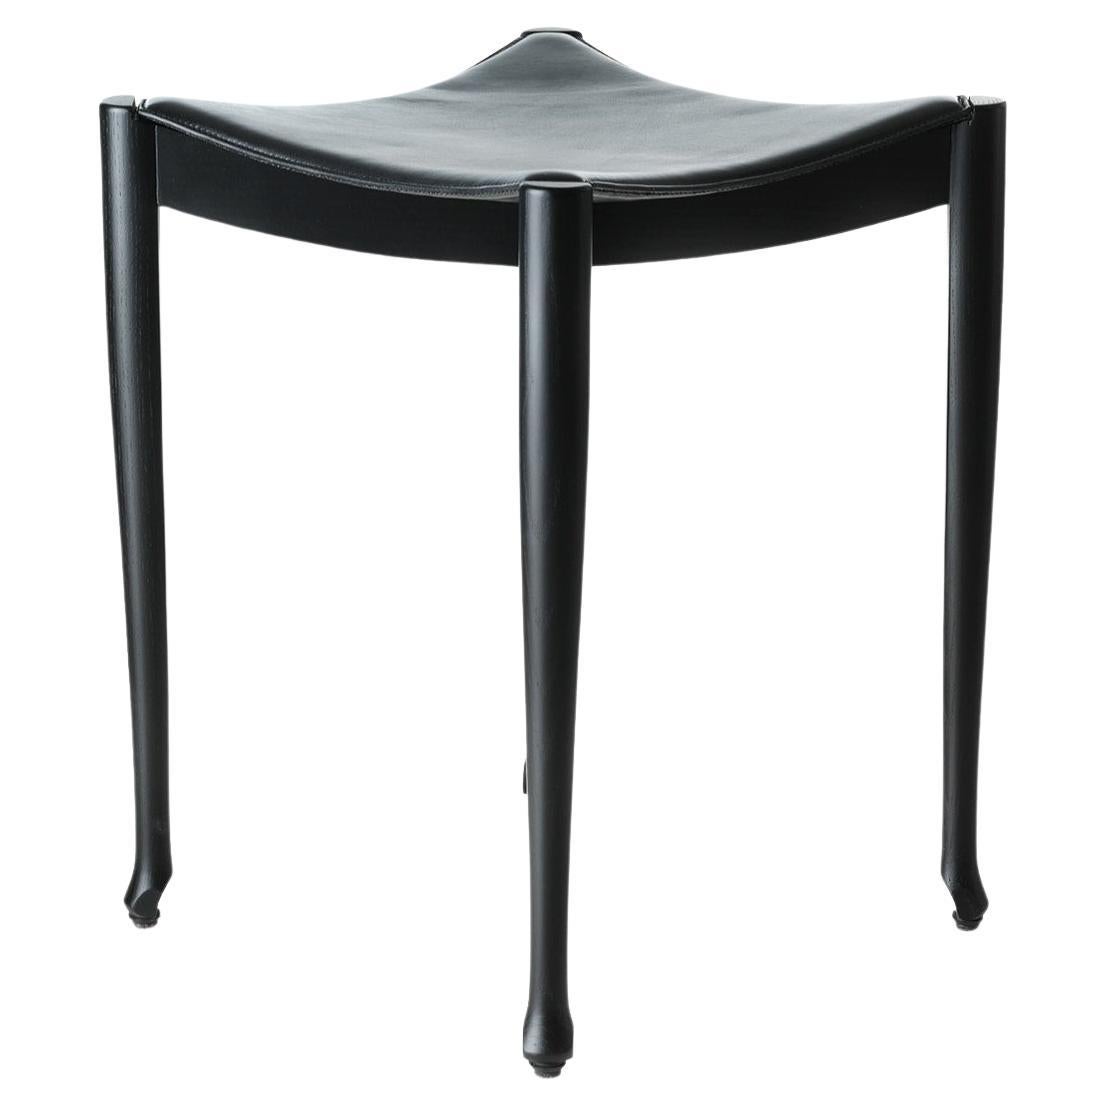 Gaulino stool by Oscar Tusquets, stained black ash wood, contemporary design For Sale